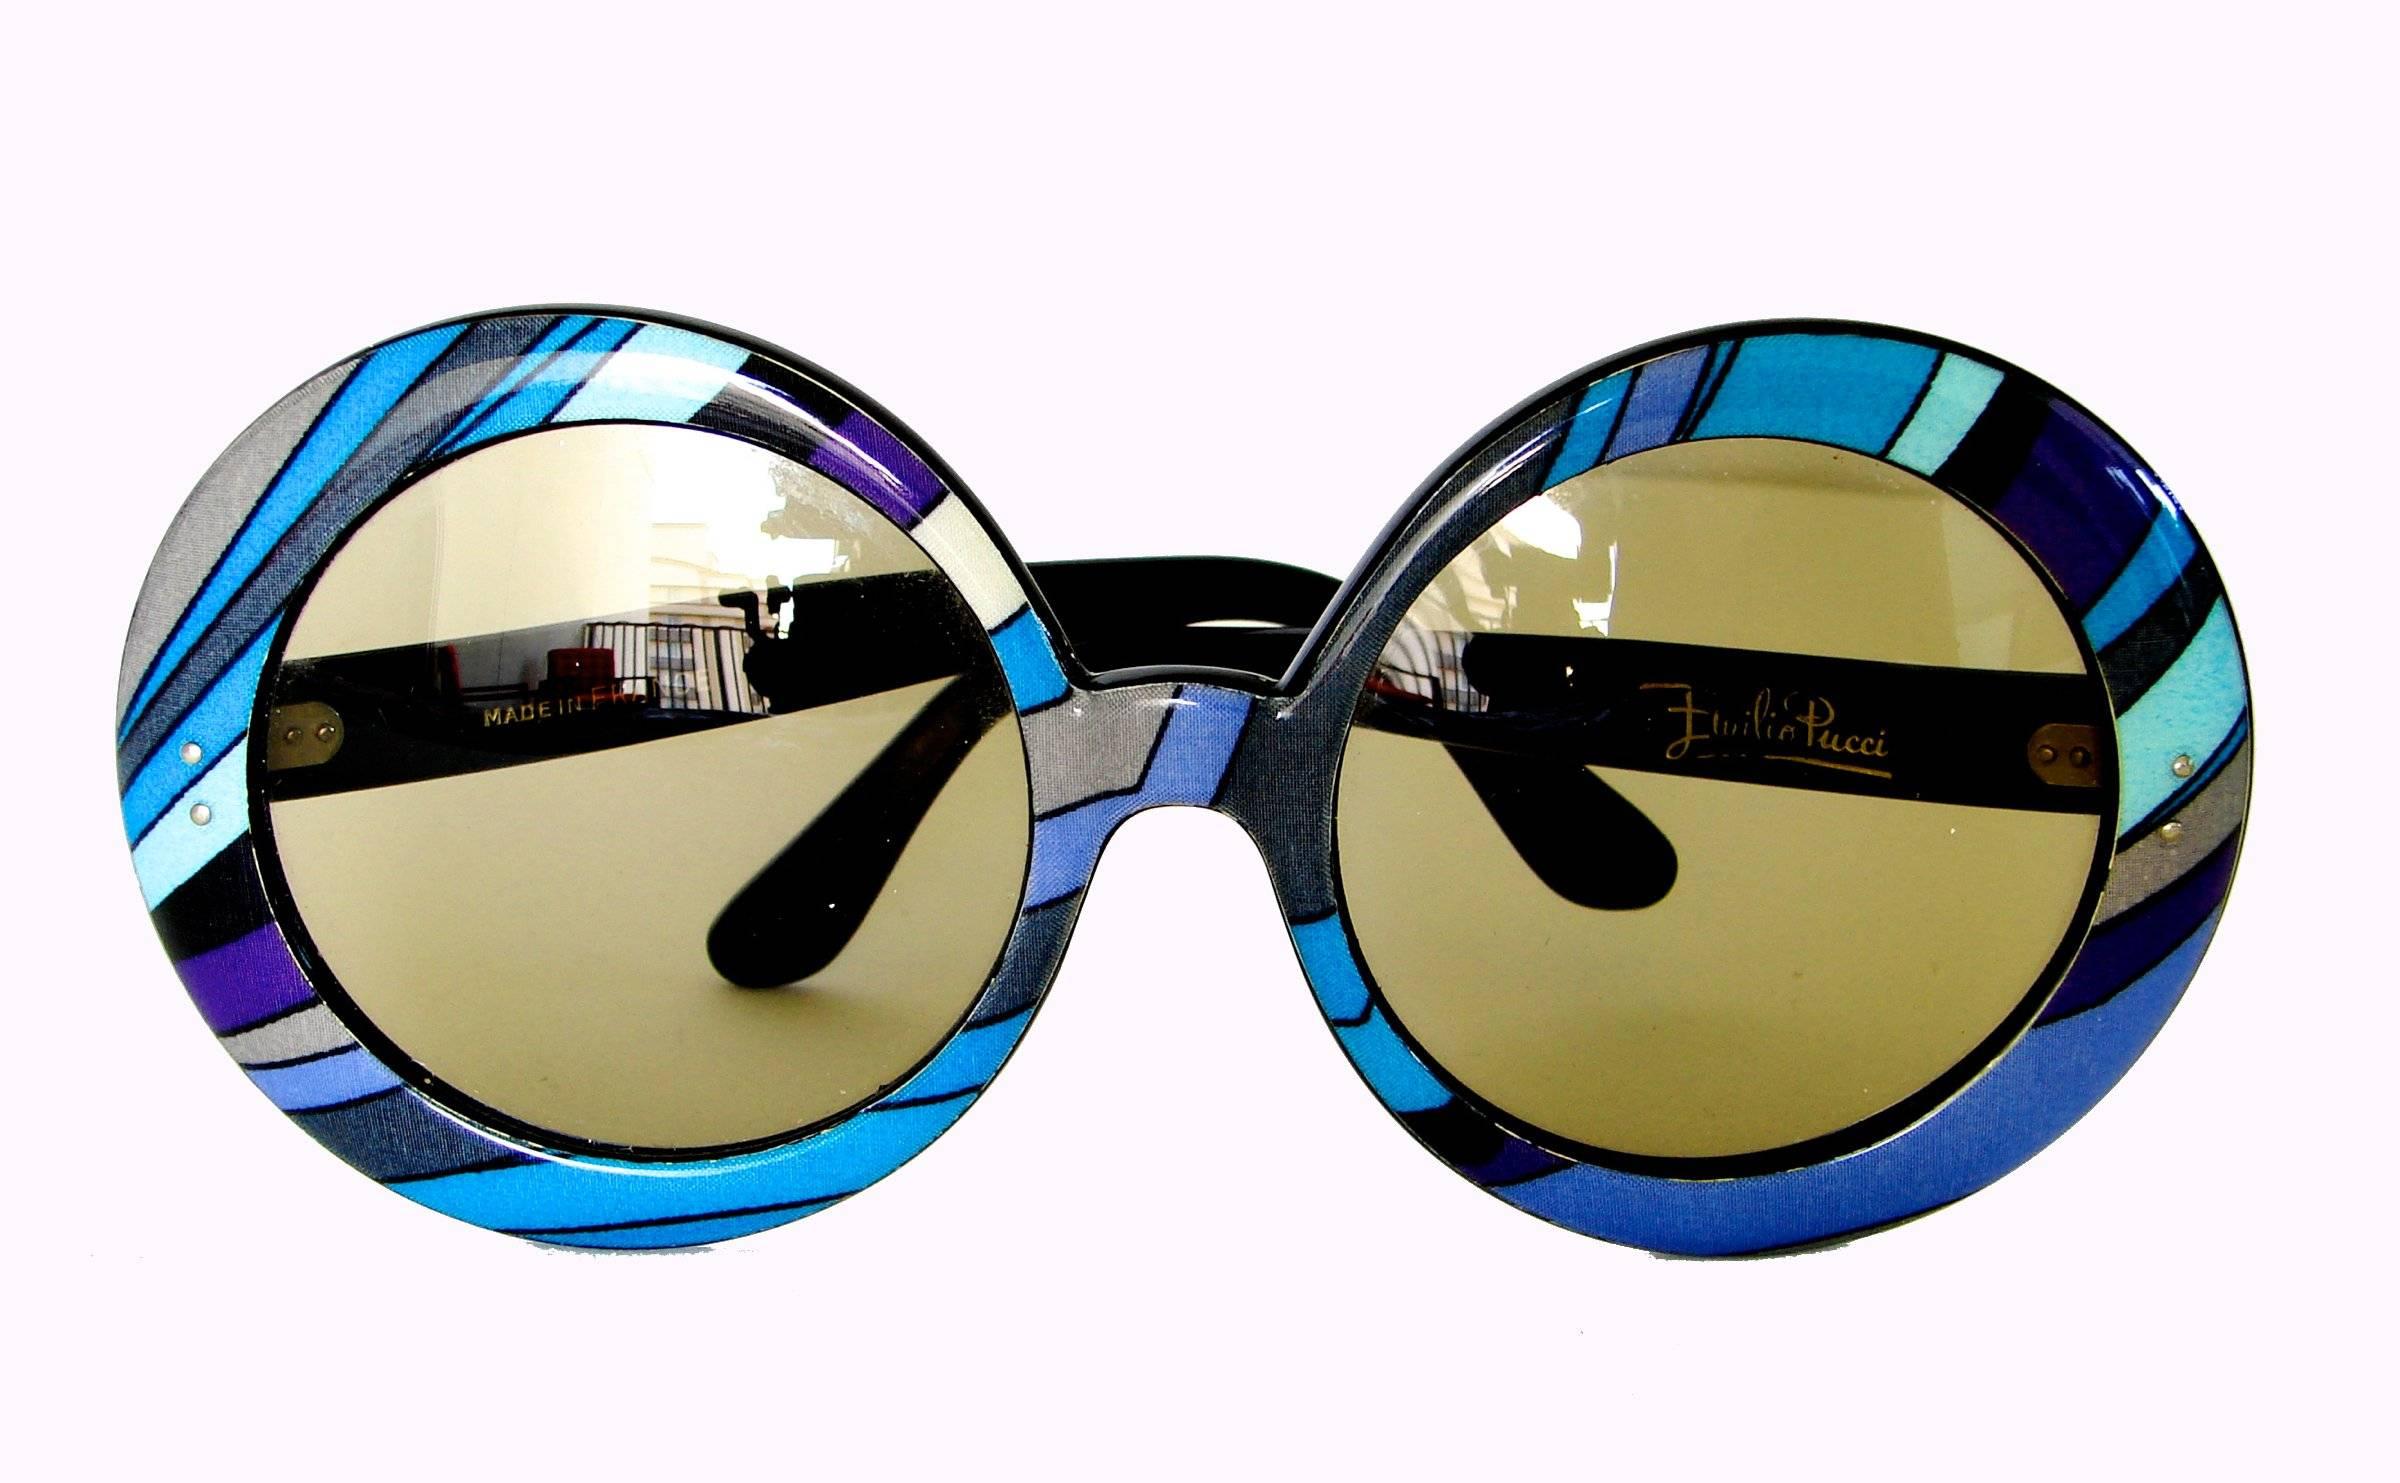 These incredible sunglasses were made by Emilio Pucci in the early 1970s. All original, and come with their original white plastic case, too! In very good vintage condition, we note some minor bend to one of the arms, see image 6. Lenses are clear!